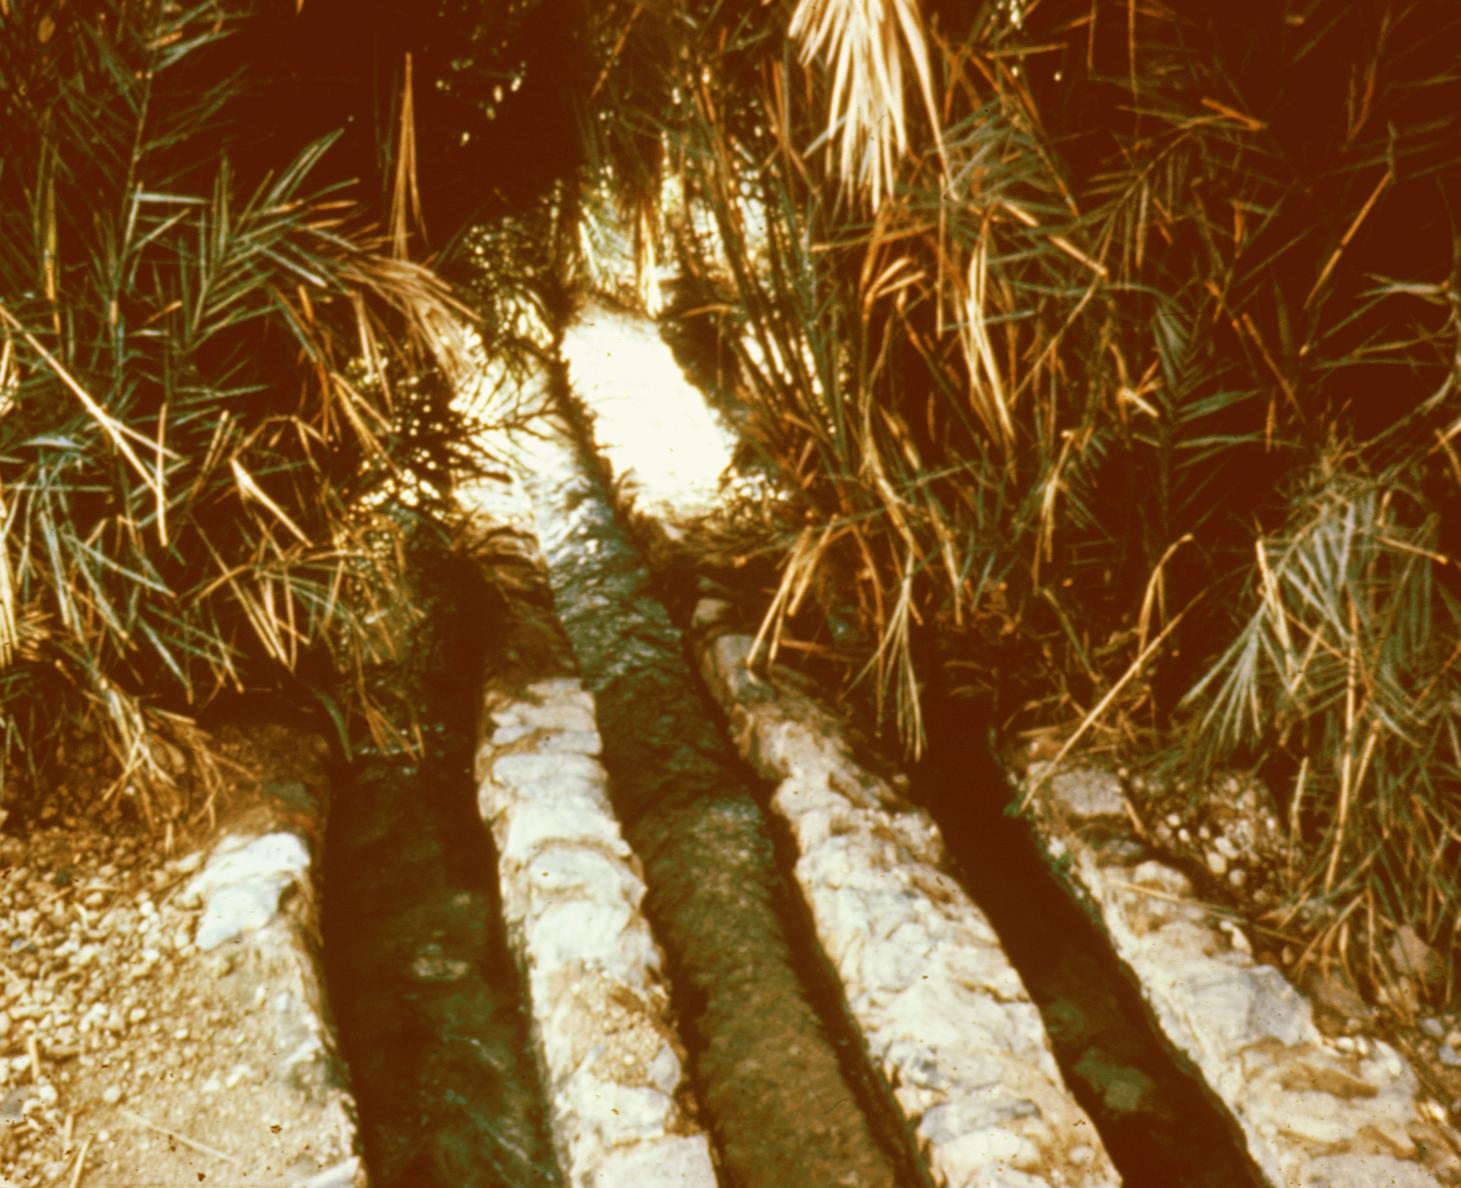 Irrigation Canals at Figuig